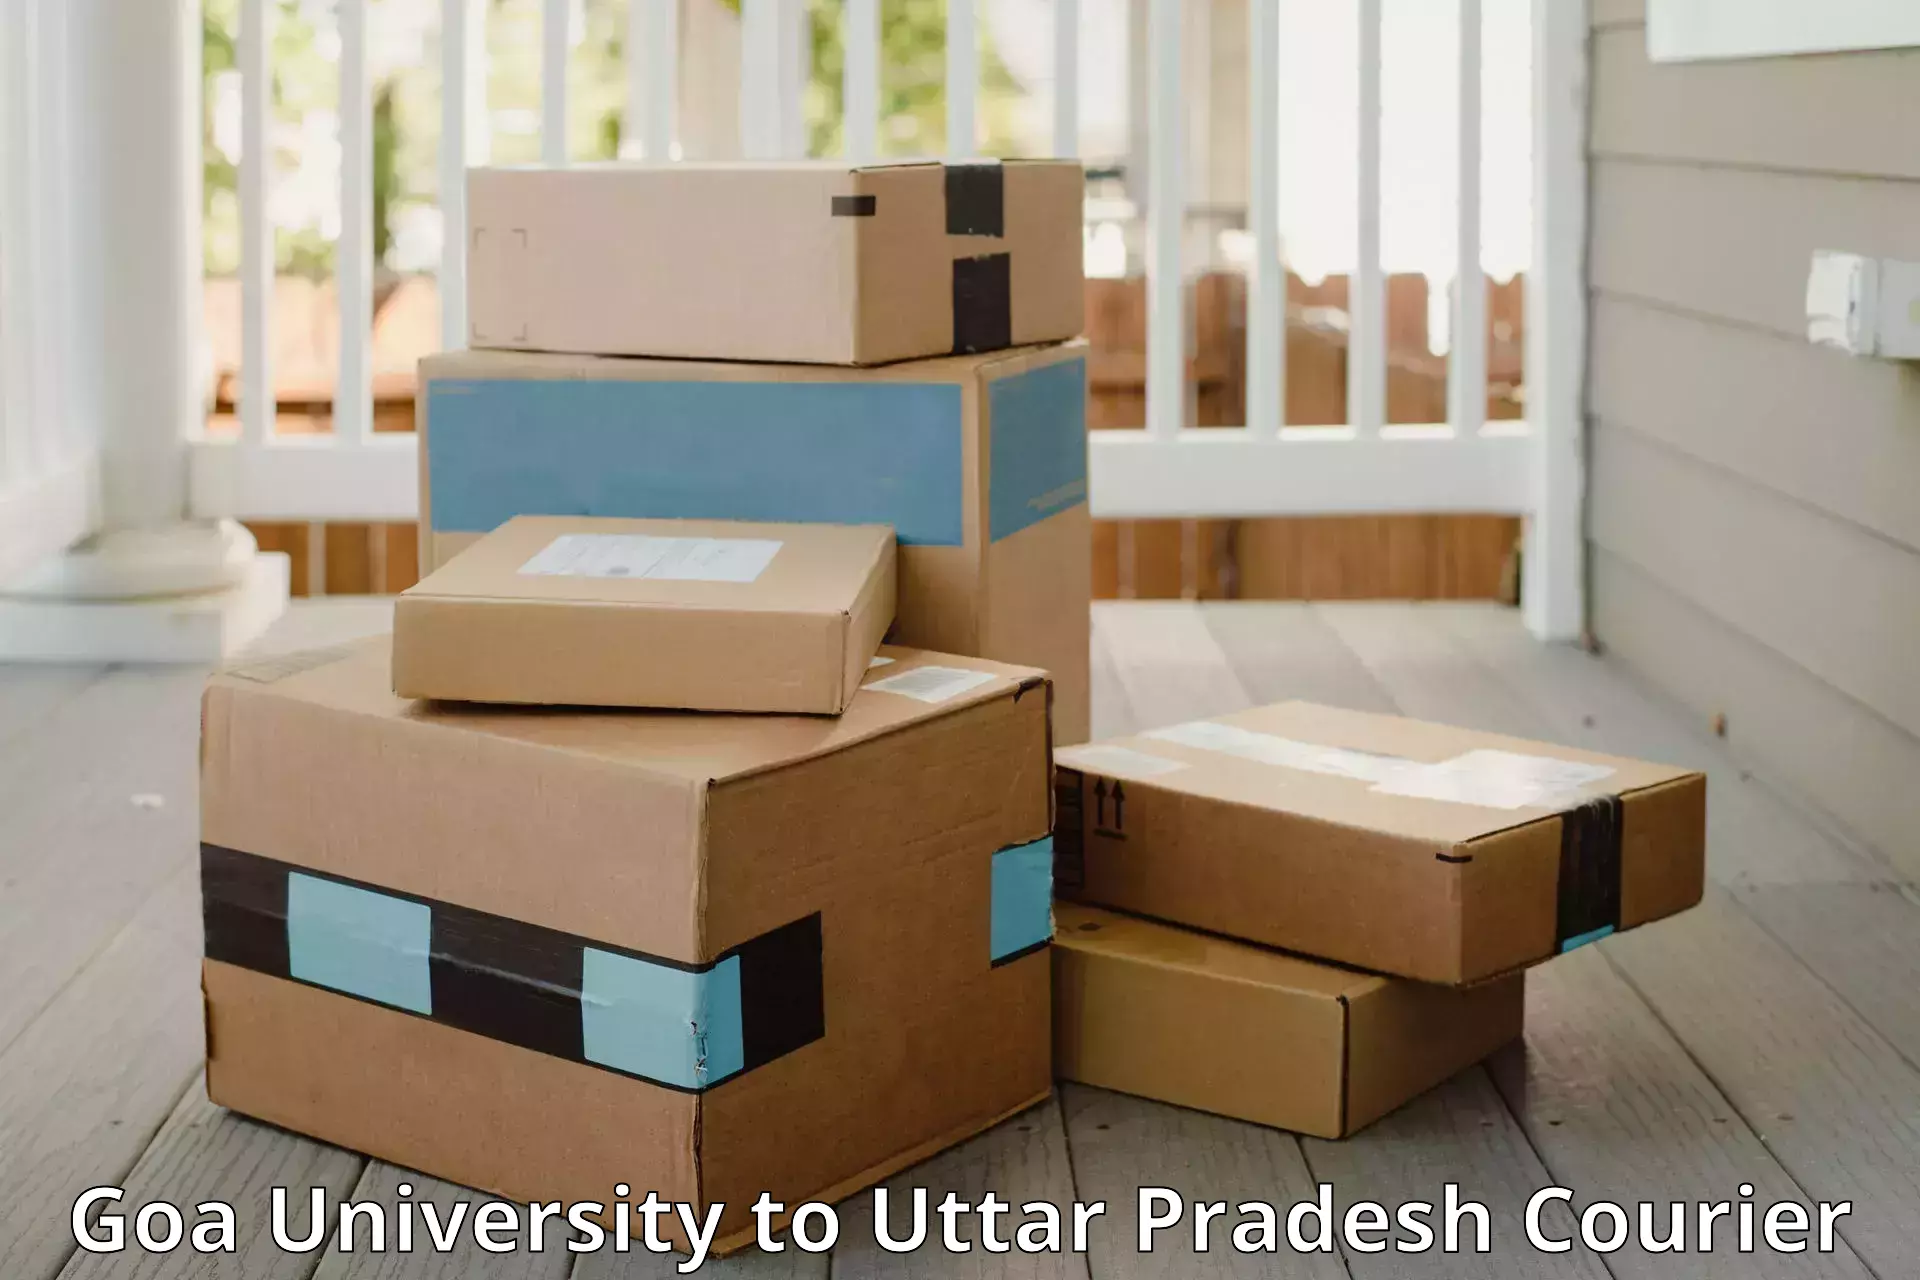 Baggage relocation service in Goa University to Lucknow